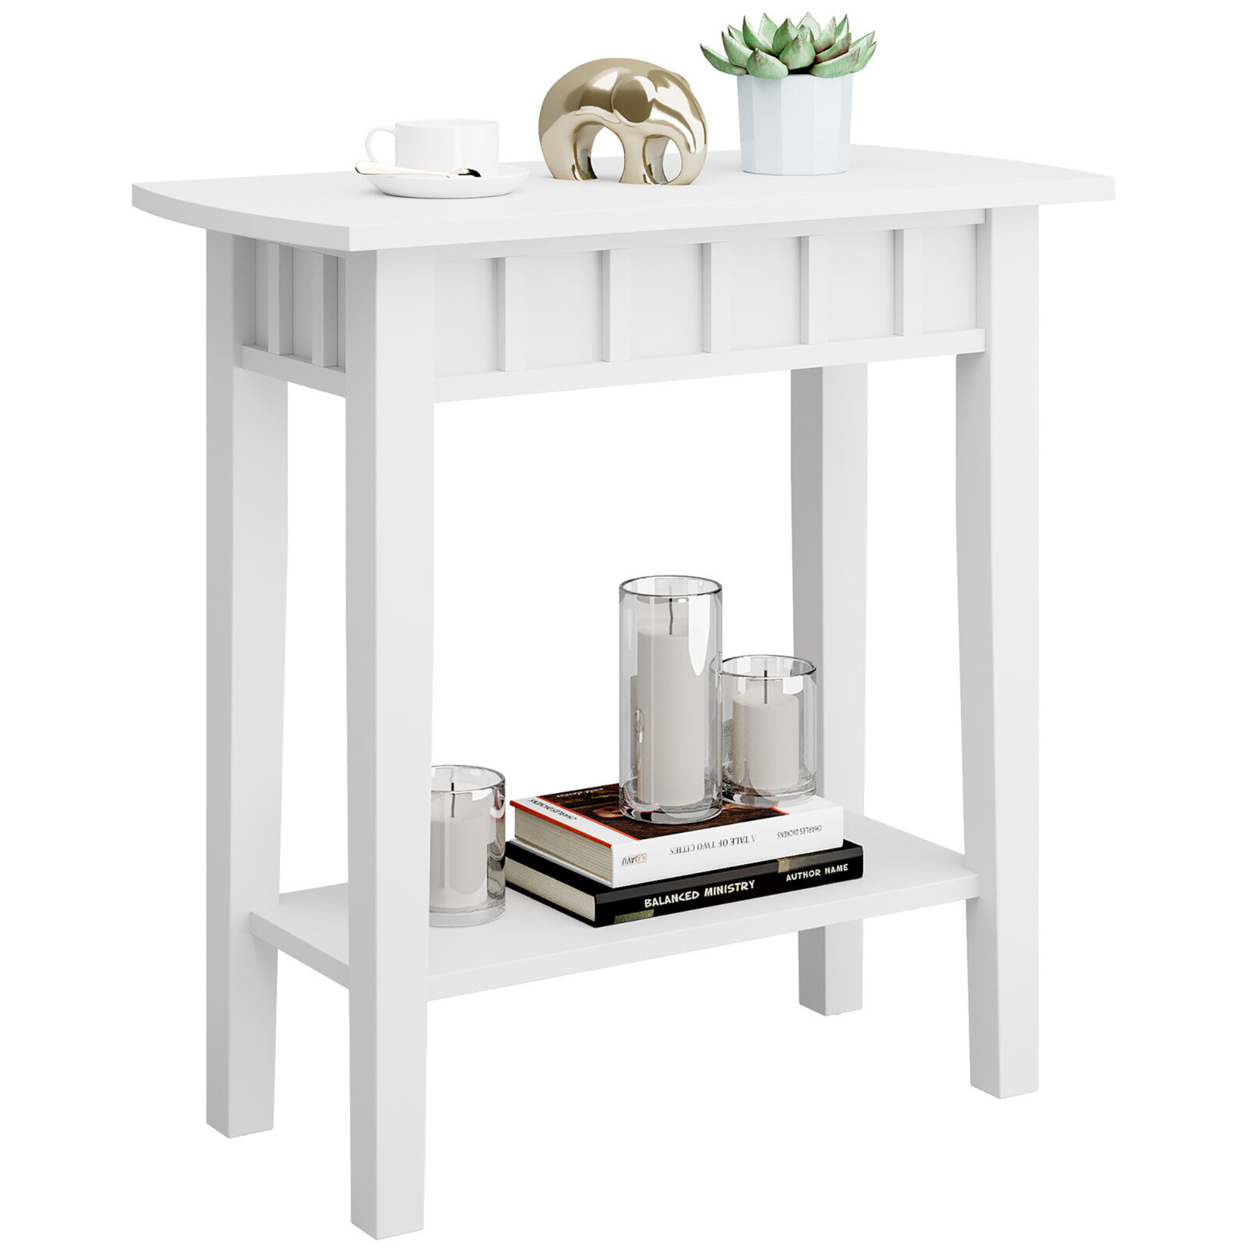 2-tier Side End Sofa Coffee Table Nightstand For Bedroom Living Room - White